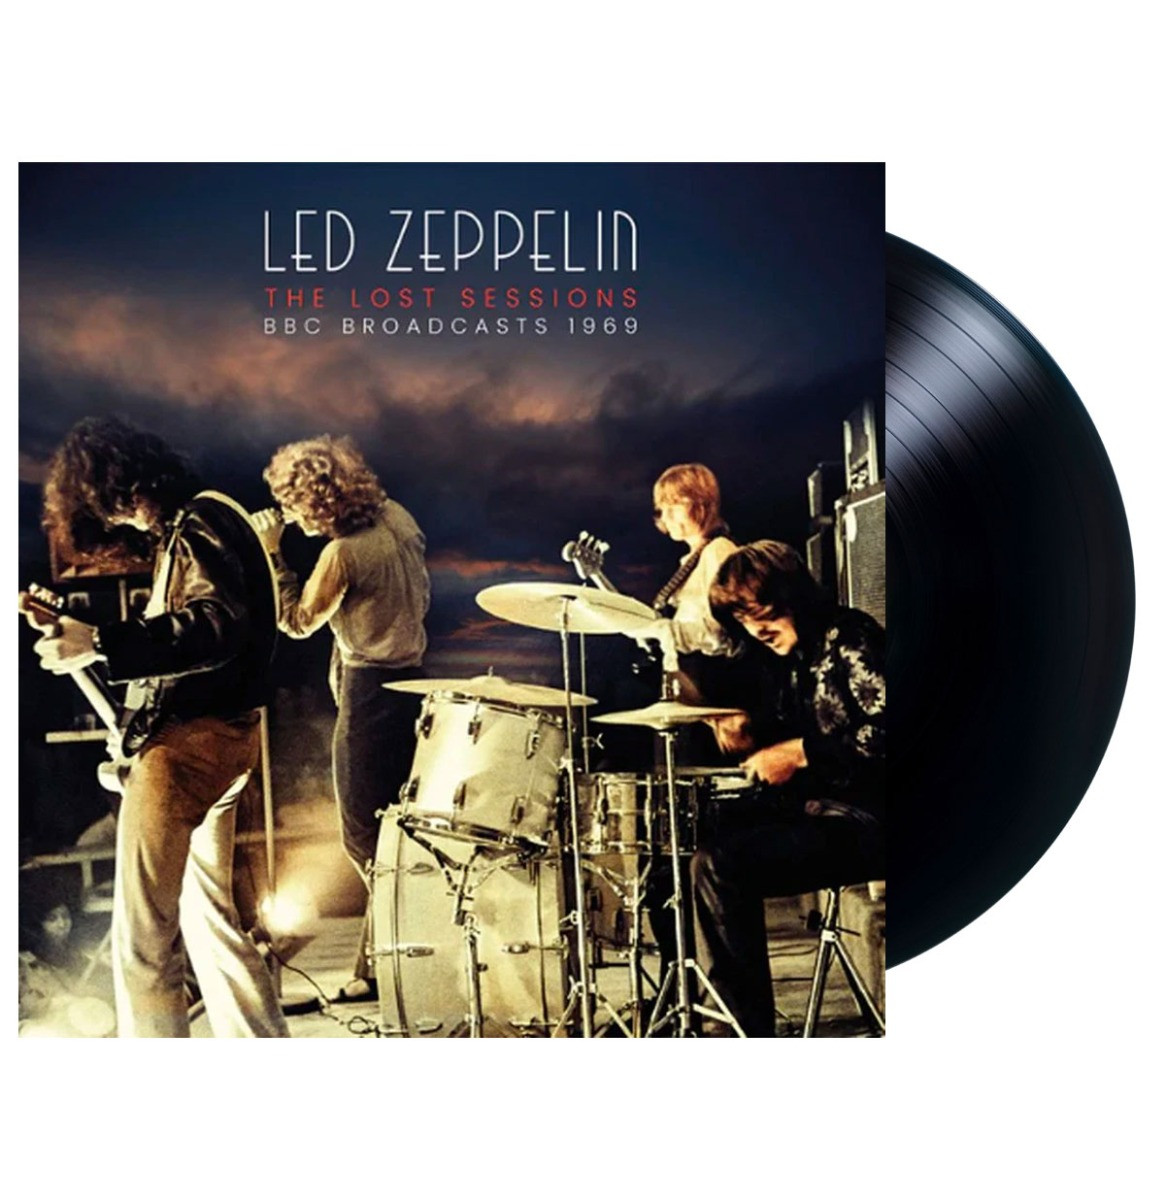 Led Zeppelin - The Lost Sessions 2LP